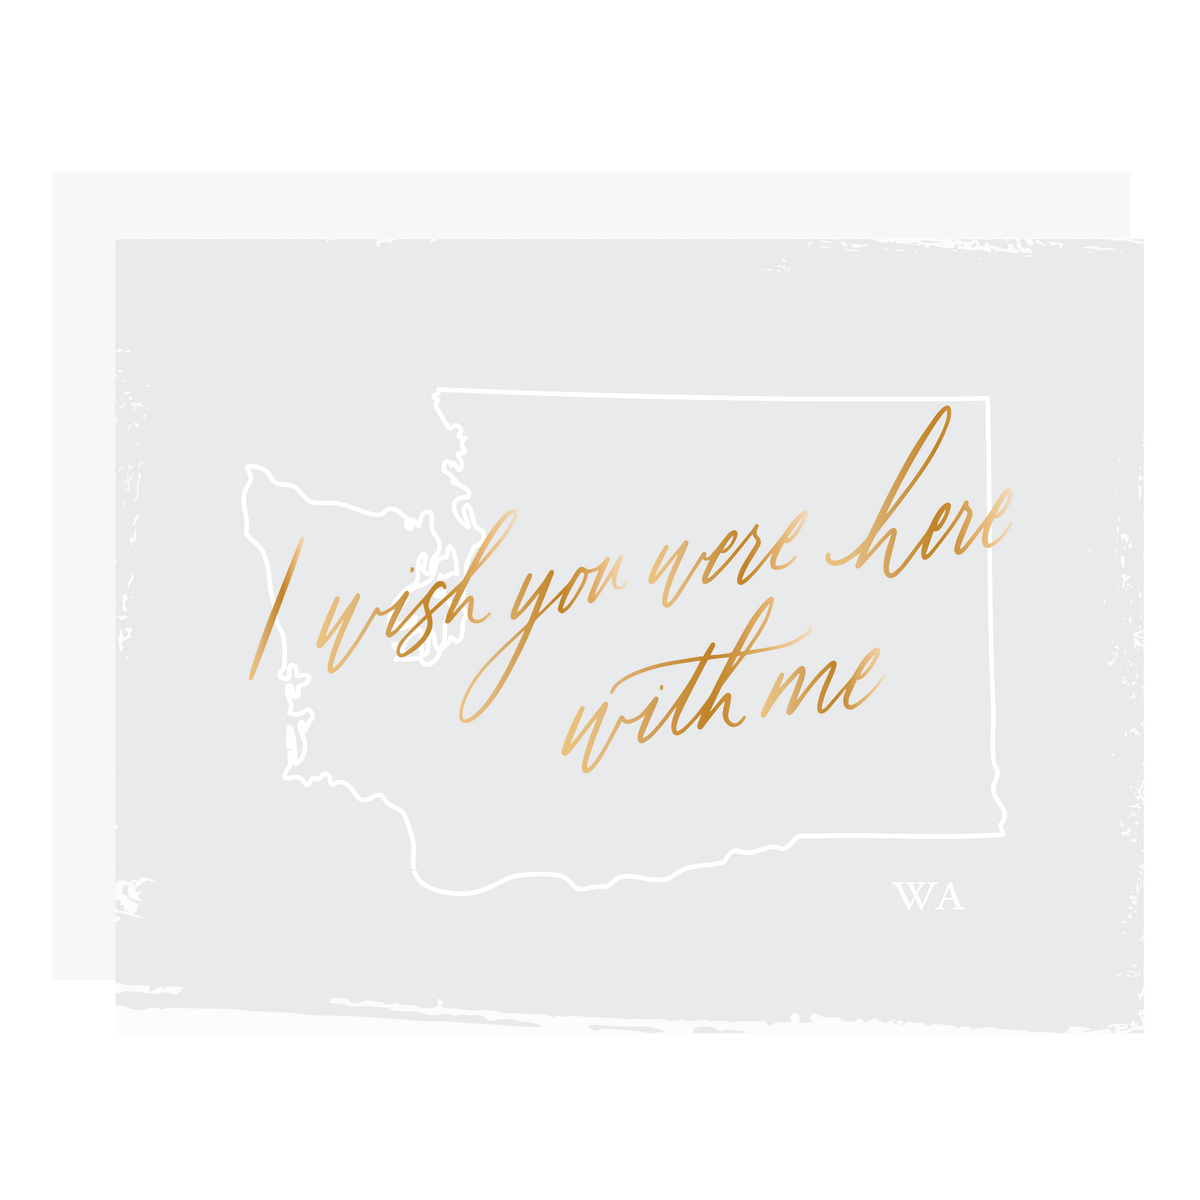 &quot;Wish You Were Here With Me - Washington&quot;, letterpress printed by hand with gold foil. 